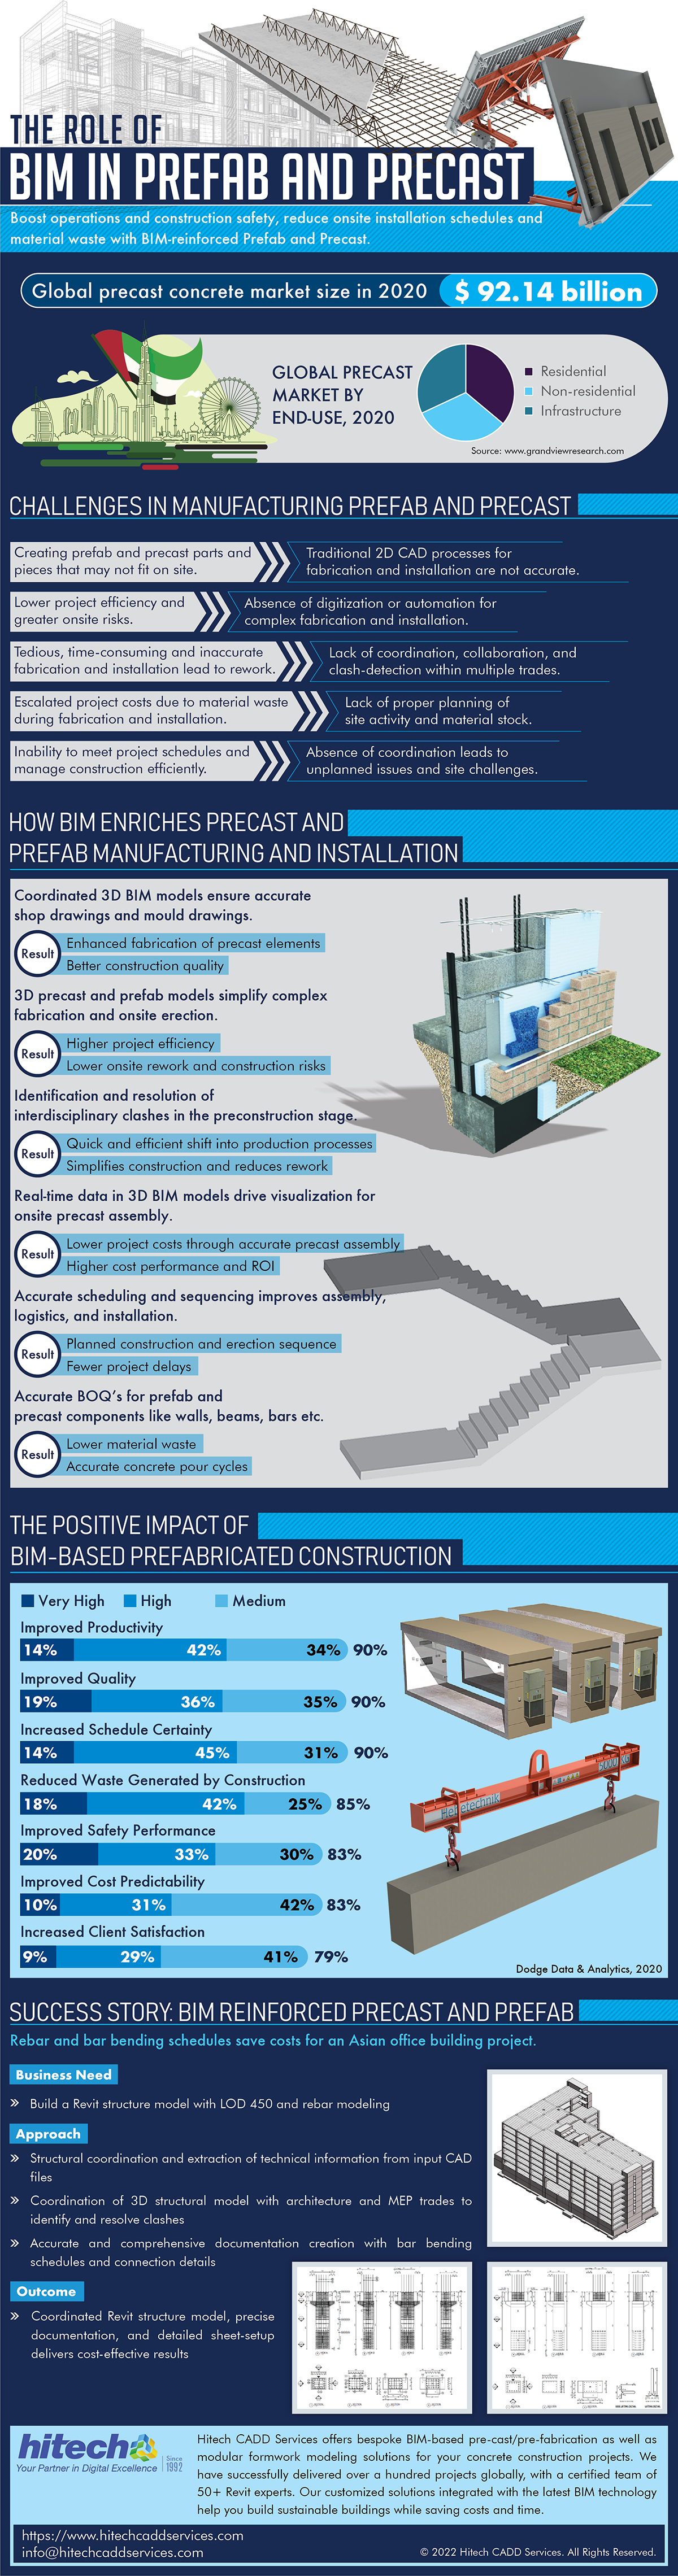 THE ROLE OF

BIM IN PREFRB AND P

Boost operations and construction safety, reduce onsite installation schedules and '\)
material waste with BIM-reinforced Prefab and Precast.

Global precast concrete market size in 2020 3 92.14 billion

   

GLOBAL PRECAST ® Residentia
MARKET BY Non-residentia
END-USE, 2020 8 Infrastructure

      
  
 

Source: www grondviewres

Creating prefab and precast parts and Traditional 2D CAD processes for

pieces that may not fit on site. fabrication and installation are not accurate.
Lower project efficiency and Absence of digitization or automation for

greater onsite risks. complex fabrication and installation.

Tedious, time-consuming and inaccurate Lack of coordination, collaboration, and
fabrication and installation lead to rework. clash-detection within multiple trades.

Escalated project costs due to material waste Lack of proper planning of
during fabrication and installation. site activity and material stock.

Inability to meet project schedules and Absence of coordination leads to
manage construction efficiently. unplanned issues and site challenges.

HOW BIM ENRICHES PRECAST AND
PREFAB MANUFACTURING AND INSTALLATION

Coordinated 3D BIM models ensure accurate
shop drawings and mould drawings.

Enhanced fabrication of precast elements
Better construction quality

3D precast and prefab models simplify complex
fabrication and onsite erection.

Higher project efficiency

Lower onsite rework and construction risks
Identification and resolution of
interdisciplinary clashes in the preconstruction stage.

Quick and efficient shift into production processes
Simplifies construction and reduces rework

Realtime data in 3D BIM models drive visualization for

  
        
     
  
         
       
       
       
       
 

   

onsite precast assembly.
Lower project costs through accurate precast assembl
Higher cost performance and ROI
Accurate scheduling and sequencing improves assem!
logistics, and installation.

(on) gonned construction and erection sequence
Fewer project delays

Accurate BOQ's for prefab and

precast components like walls, beams, bars etc. QV
Lower material waste \ \
Accurate concrete pour cycles \

LION NY SY Na Nel
BIM-BASED PREFABRICATED CONSTRUCTION

MB Very High HM High
Improved Productivity
14%

  
 
 
 
  
 
   

  
 

  
    
    

42% 34% 90%

    

  
   
    

Improved Quality

23 ka

Increased Schedule Certainty
14% 45% 31%

Reduced Waste Generated by Construction
18% 42% 25% 85%
Improved Safety Performance

{3 E33
Improved Cost Predictability

10% 31% 42% 83%

Increased Client Satisfaction

41%) 79%
SUCCESS STORY: BIM REINFORCED PRECAST AND PREFAB

Rebar and bar bending schedules save costs for an Asian office building project.

35% 90%

    

  
   
       
   

90%

    

  

30% 83%

    

 
      
     
     
       

  
   
   

Dodge Data & Analytics, 2020

TELAT EET)
oa TE vit structure model w D 450 and rebar modeling

Approach

» Structural coordination and extraction of technical information from input CAD

LIES

Coordination of 3D structural model with architecture and MEP trades to

identify and resolve clas

Accurate and comprehensive documentation creation with bar bending

schedules and connection details

delivers cost-effective results

   

- A Hitech CADD Services offers bespoke BIM-based pre-cast/pre-fabrication as well as

I eC. Z cation
s modular formwork modeling solutions for your concrete construction projects. We
Ye DO fence .
x farinenn Dok; Sxcarenc have successfully delivered over a hundred projects globally, with a certified team of
50+ Revit experts. Our customized solutions integrated with the latest BIM technology

help you build sustainable buildings while saving costs and time.